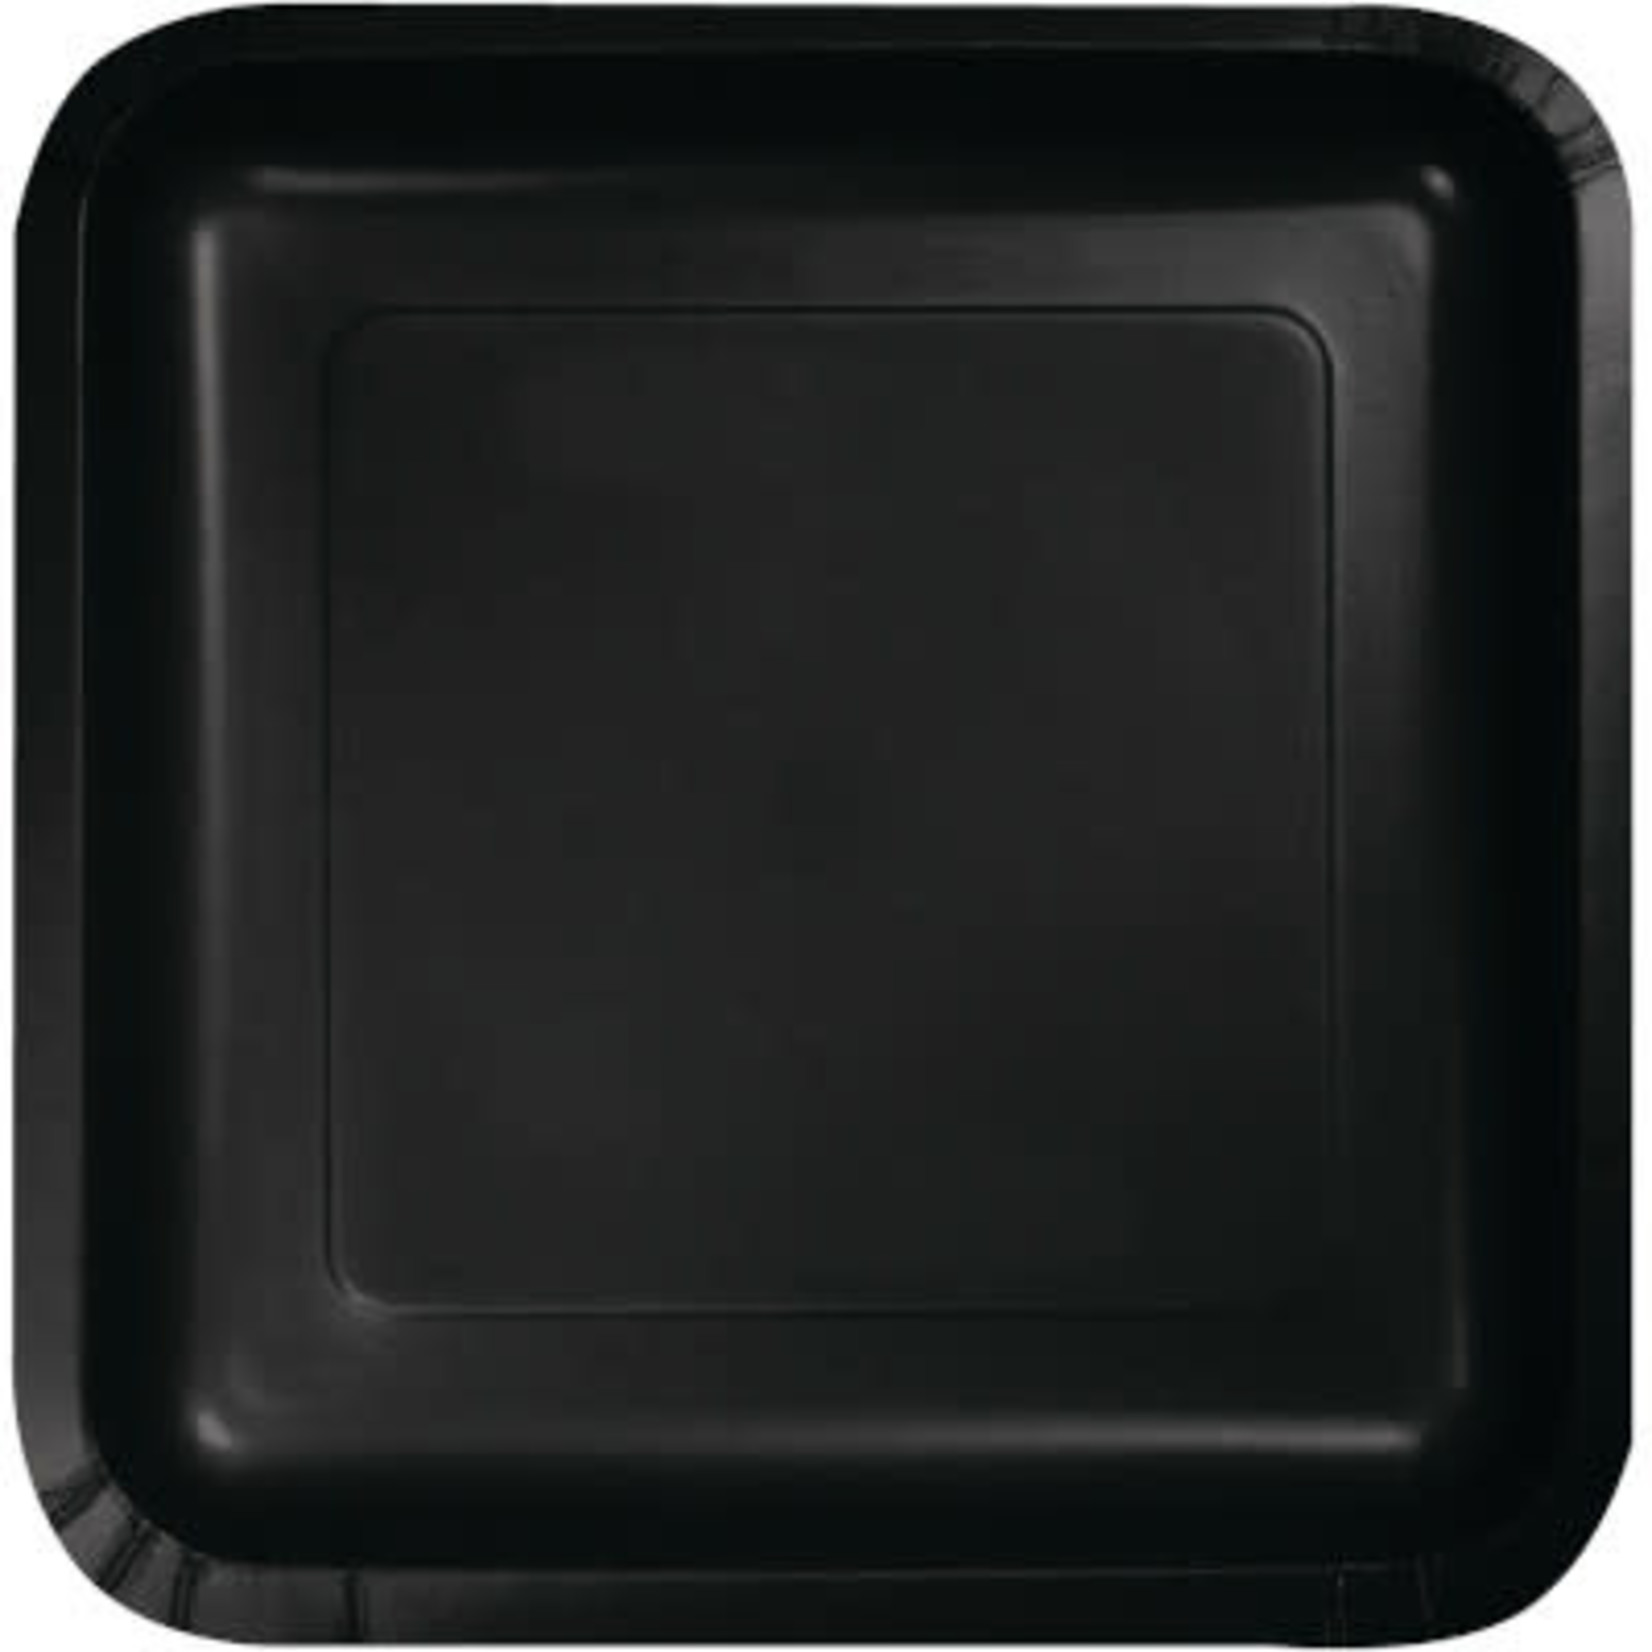 Touch of Color 7" Black Square Plates - 18ct.